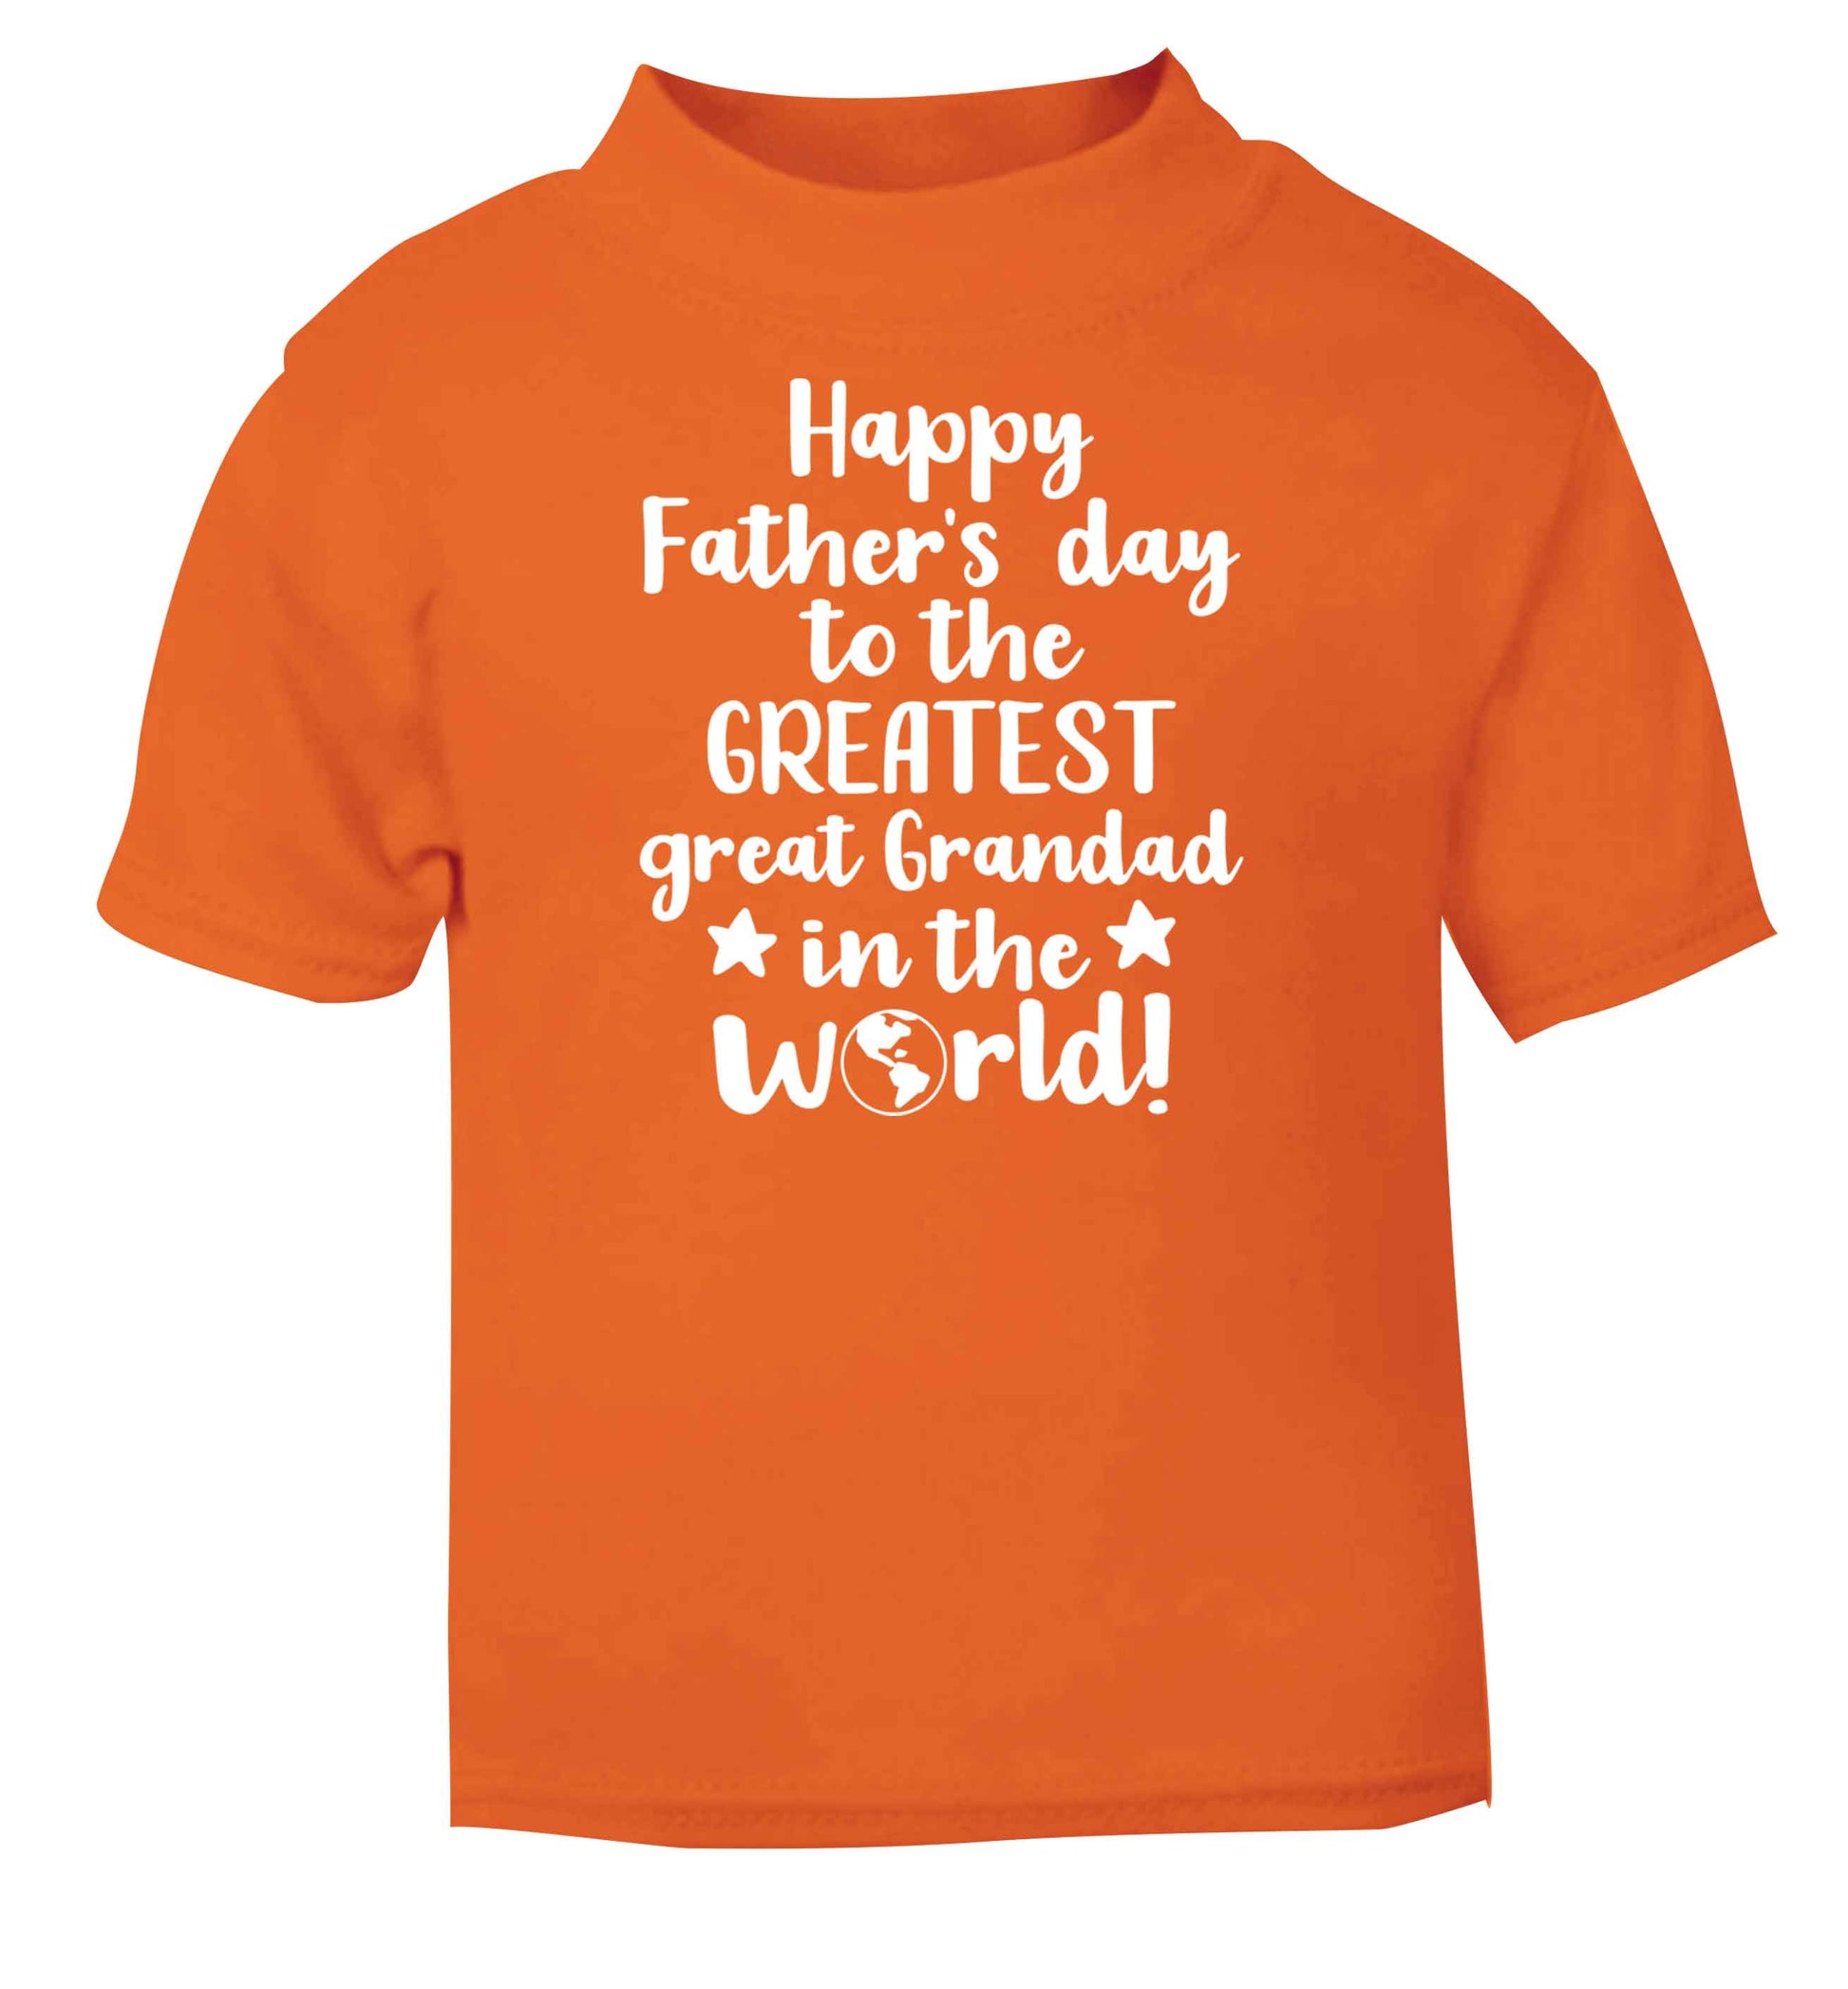 Happy Father's day to the greatest great grandad in the world orange baby toddler Tshirt 2 Years